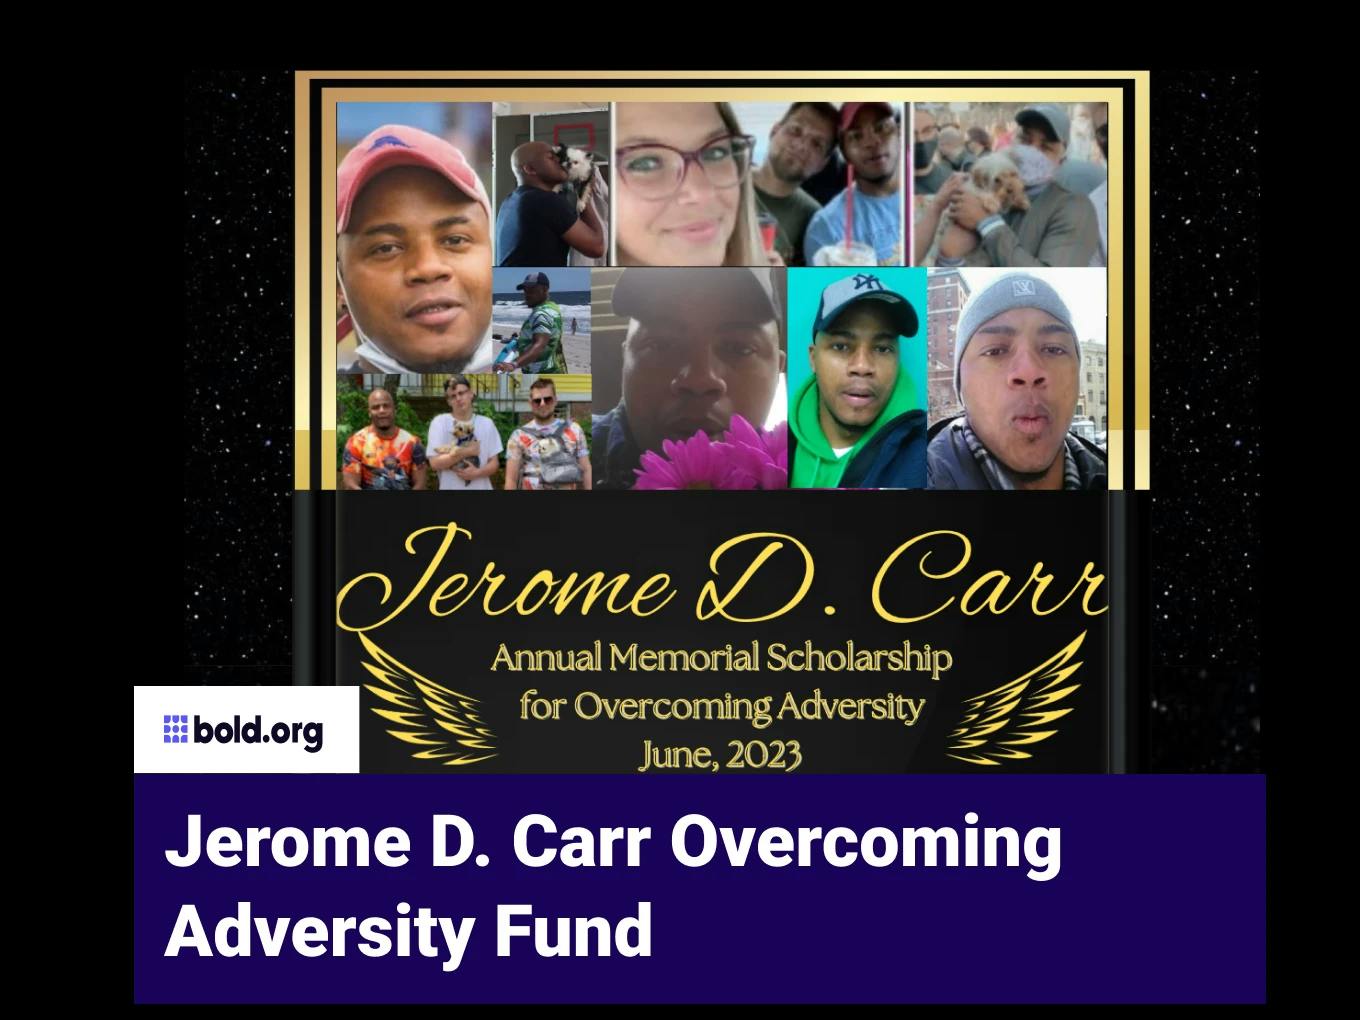 Jerome D. Carr Overcoming Adversity Fund